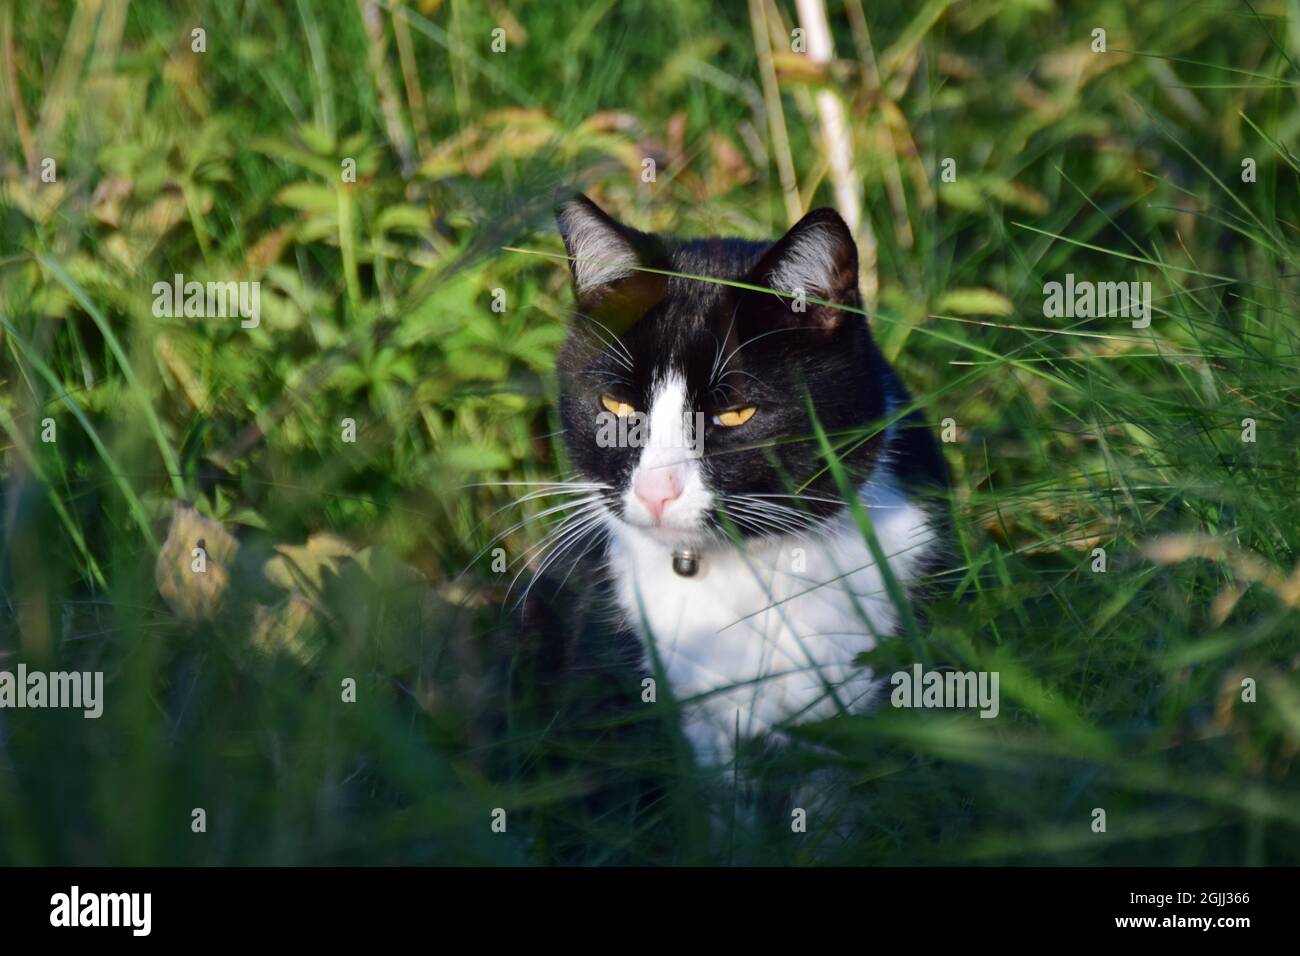 Black and white cat sitting between grasses Stock Photo